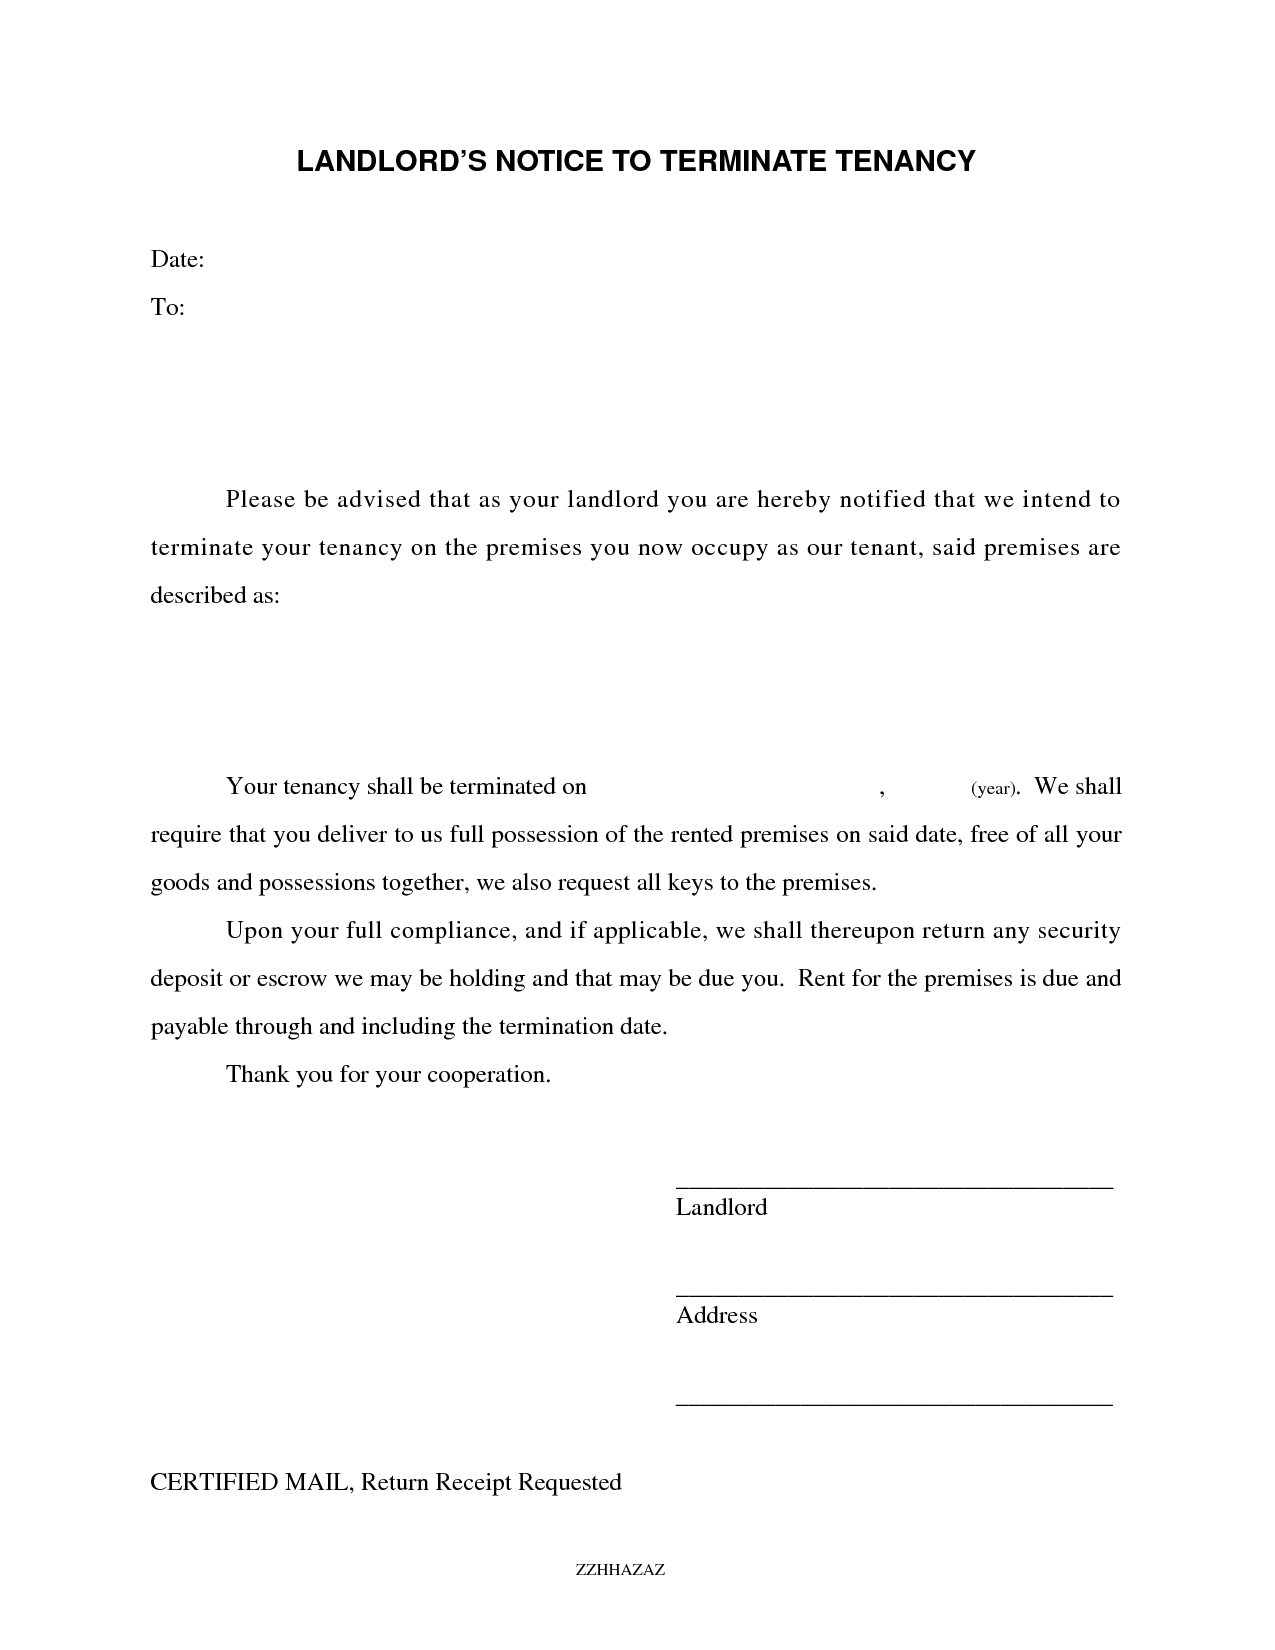 Tenant Lease Termination Letter From Landlord Being A with size 1275 X 1650